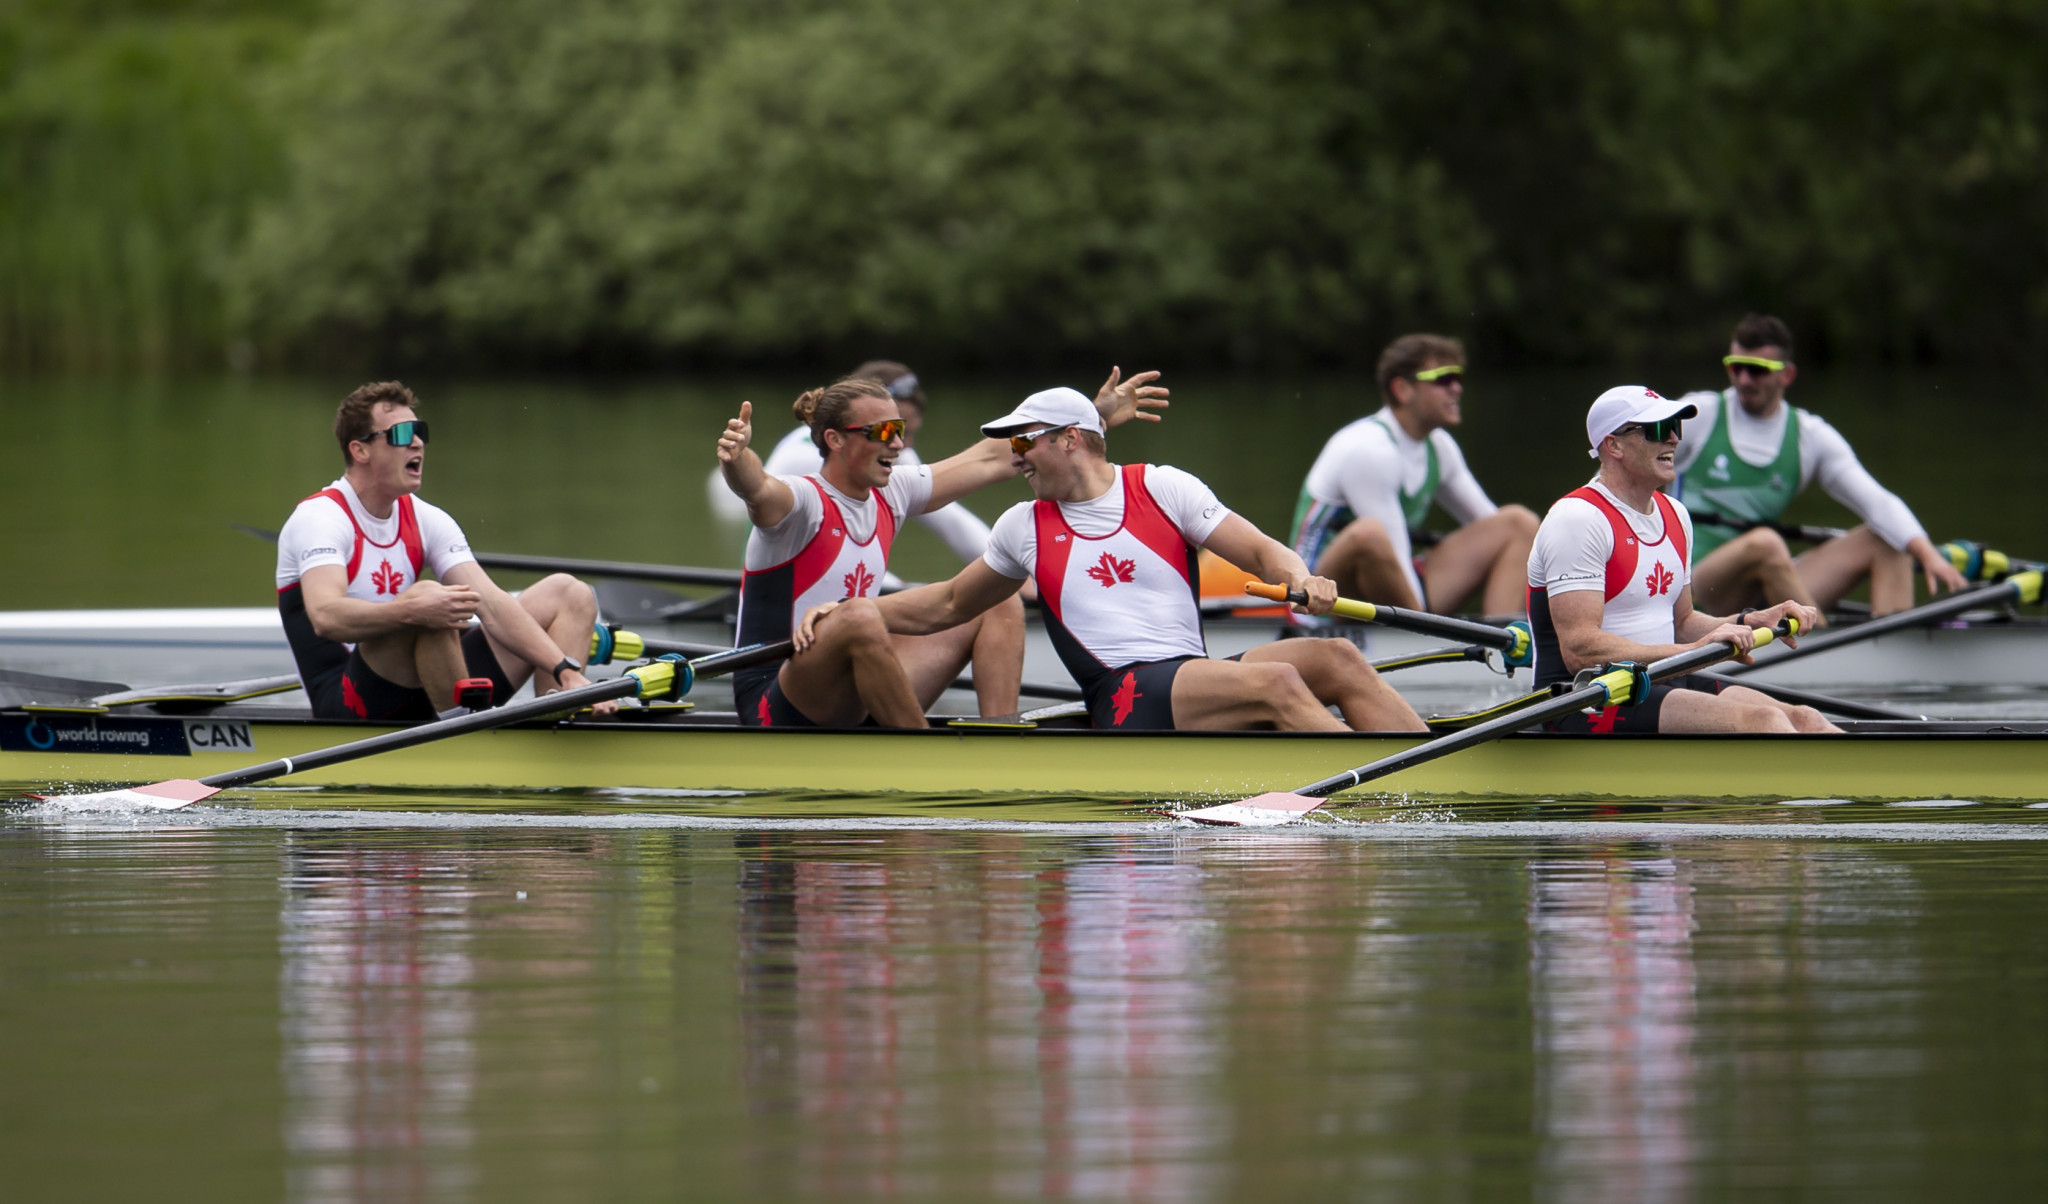 The Canadian men's four team were among a number of crews to experience joy at the World Rowing Final Olympic Qualification Regatta ©Getty Images